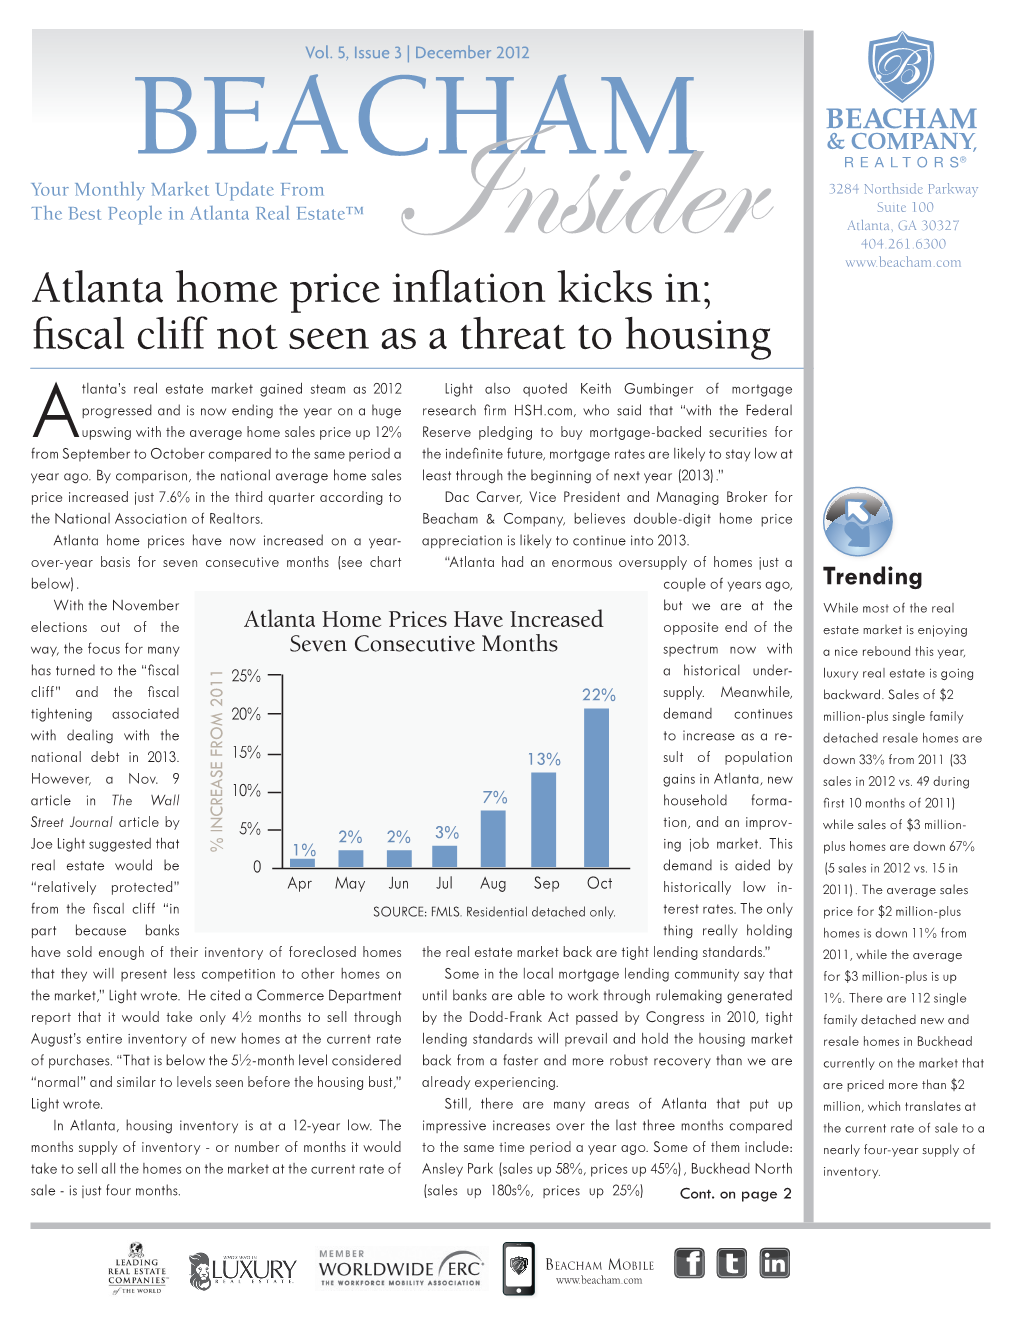 Atlanta Home Price Inflation Kicks In; Fiscal Cliff Not Seen As a Threat to Housing